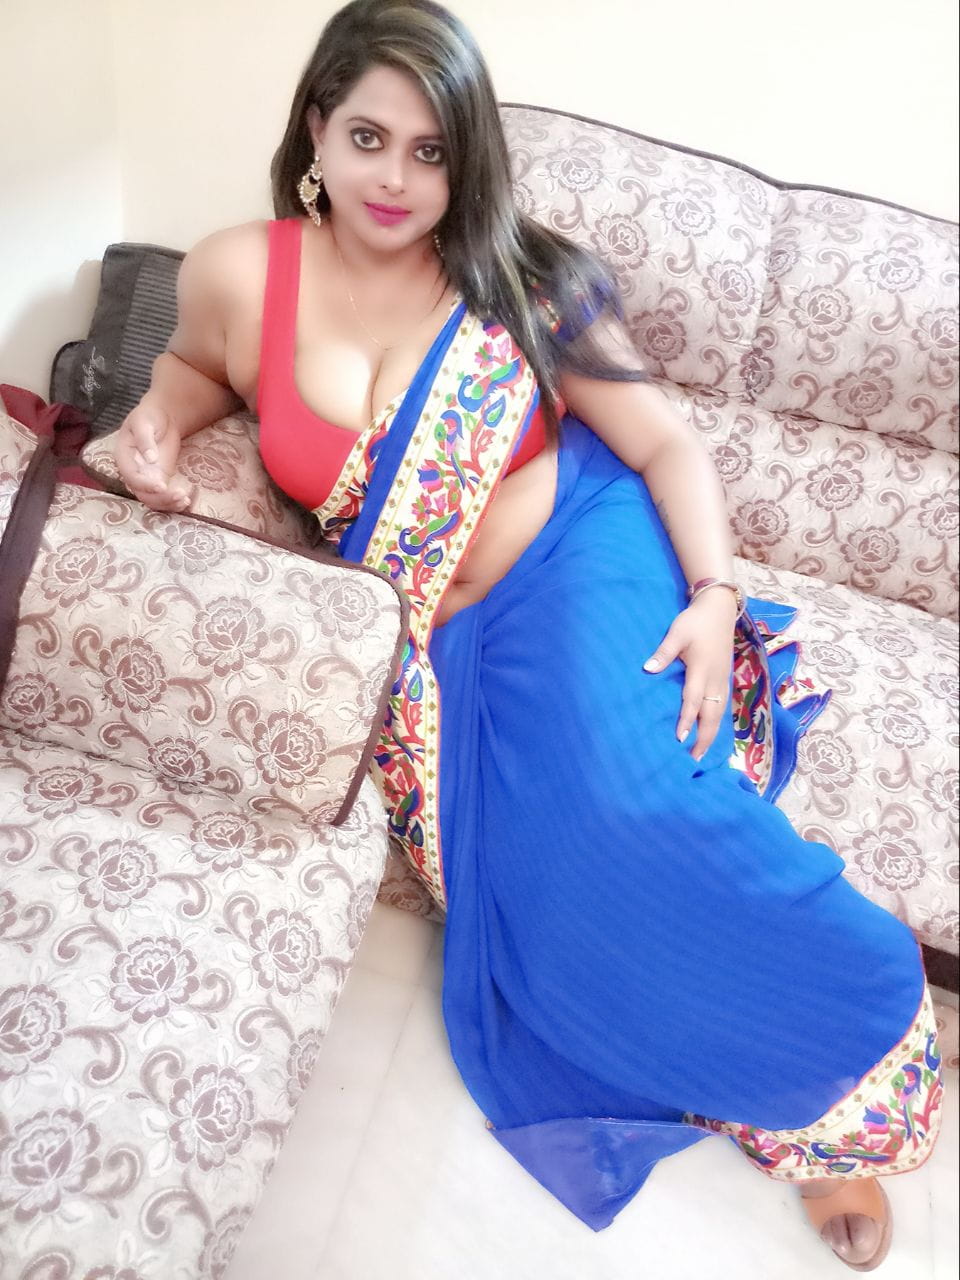 Connaught Place Escort Girl Number